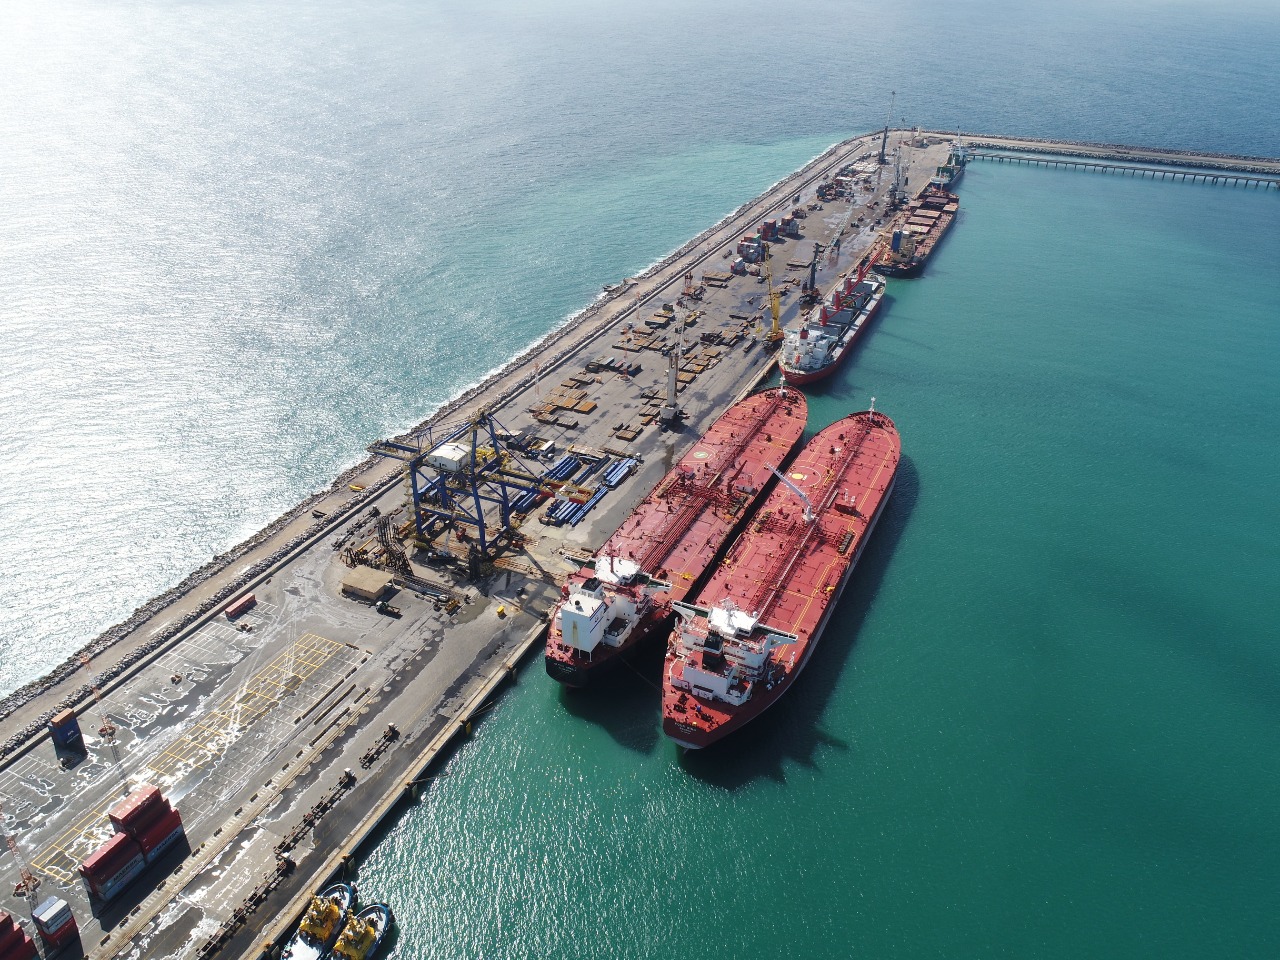 Aerial view of vessels in the port of Pecém, Brazil.